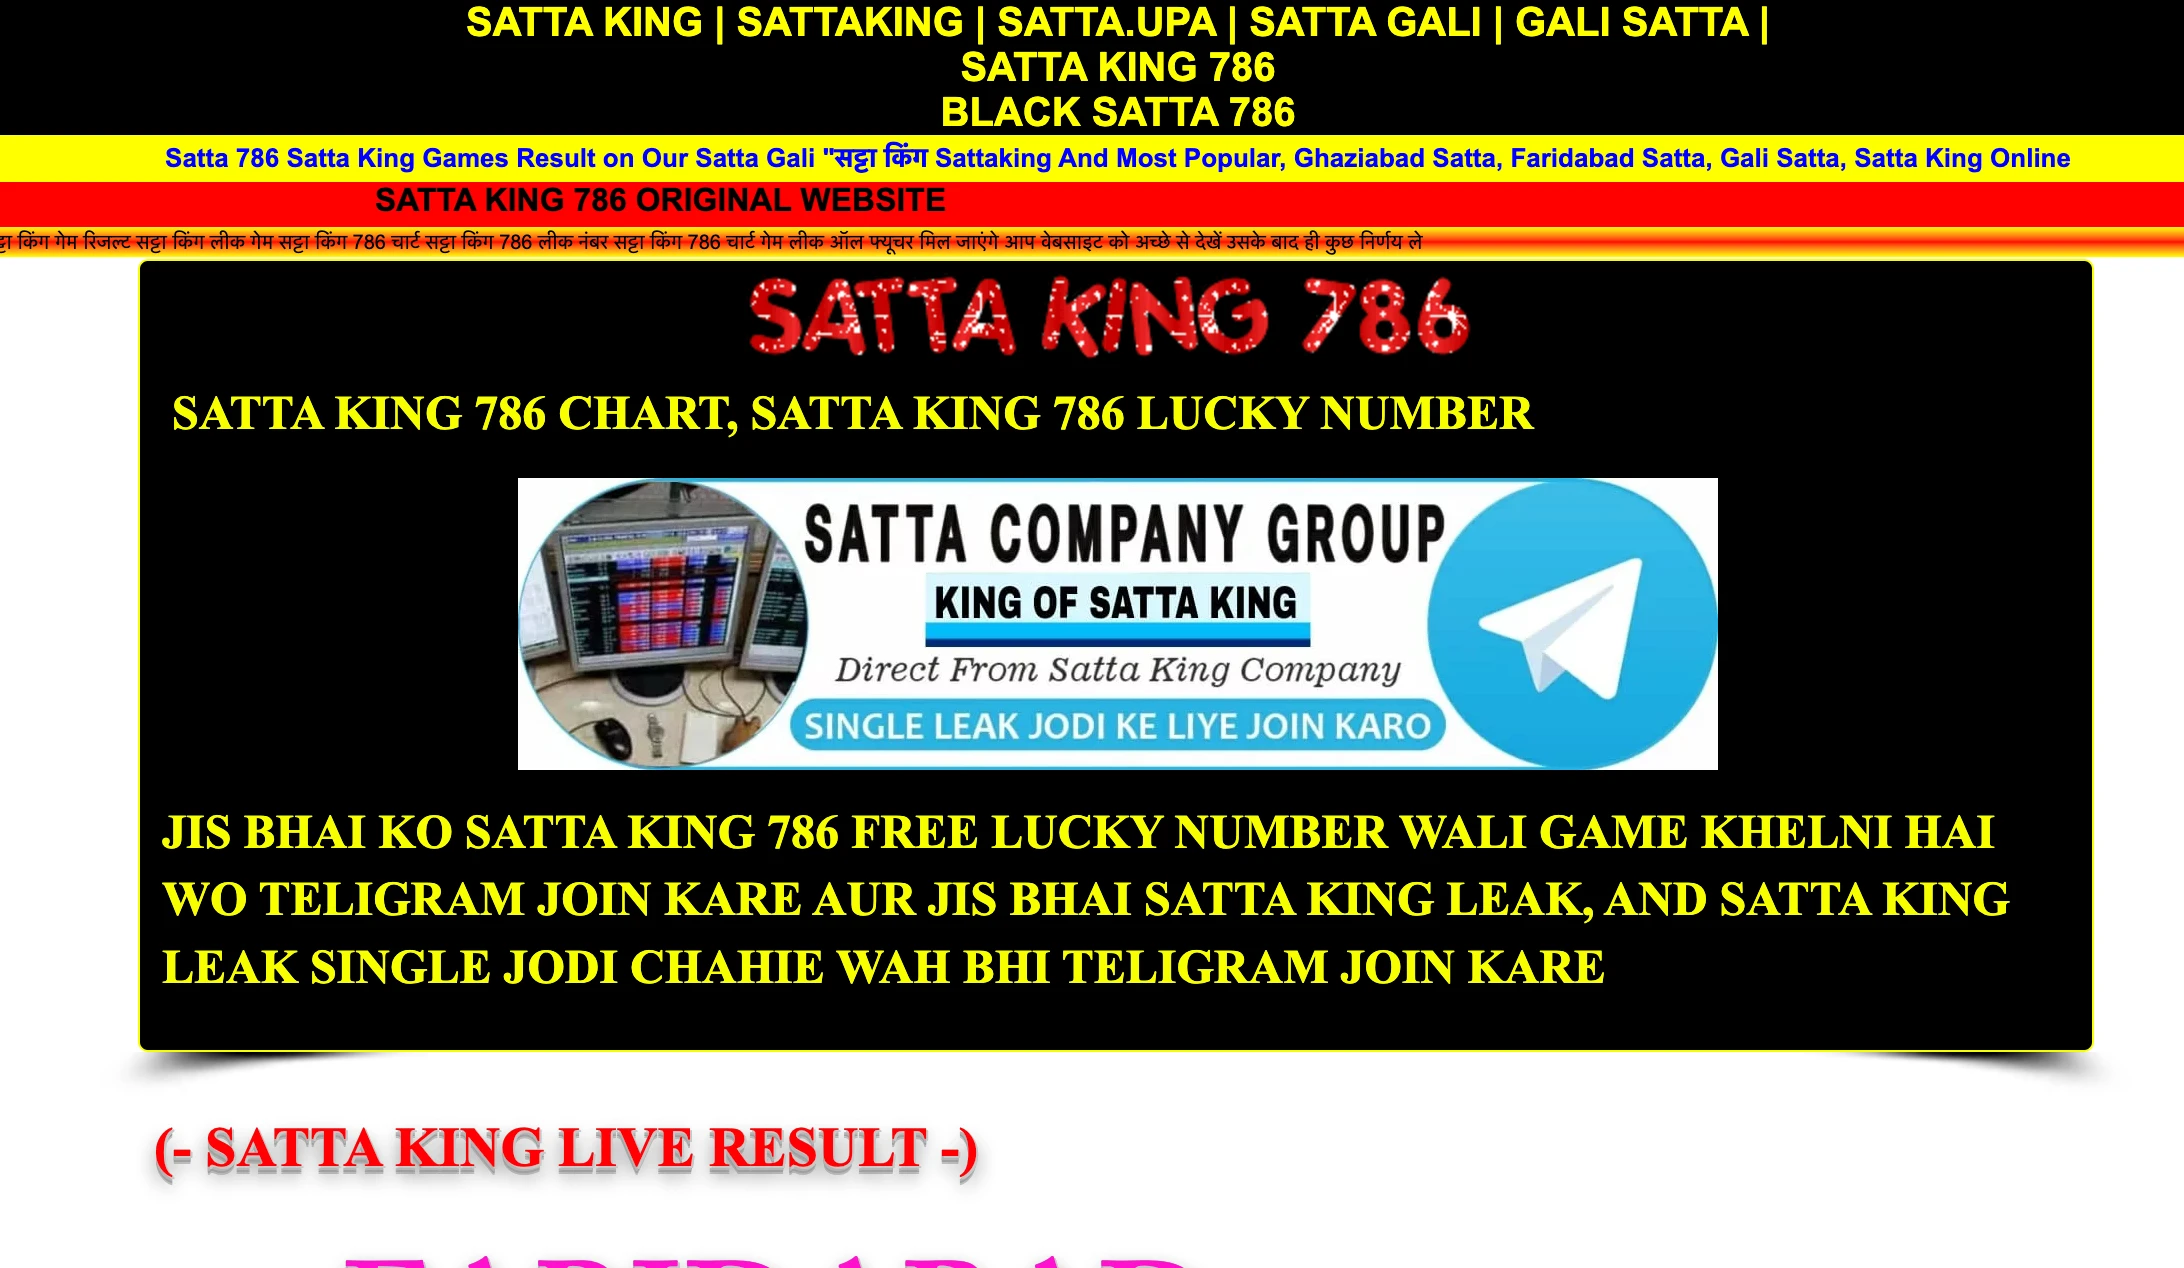 What is this Satta King 786